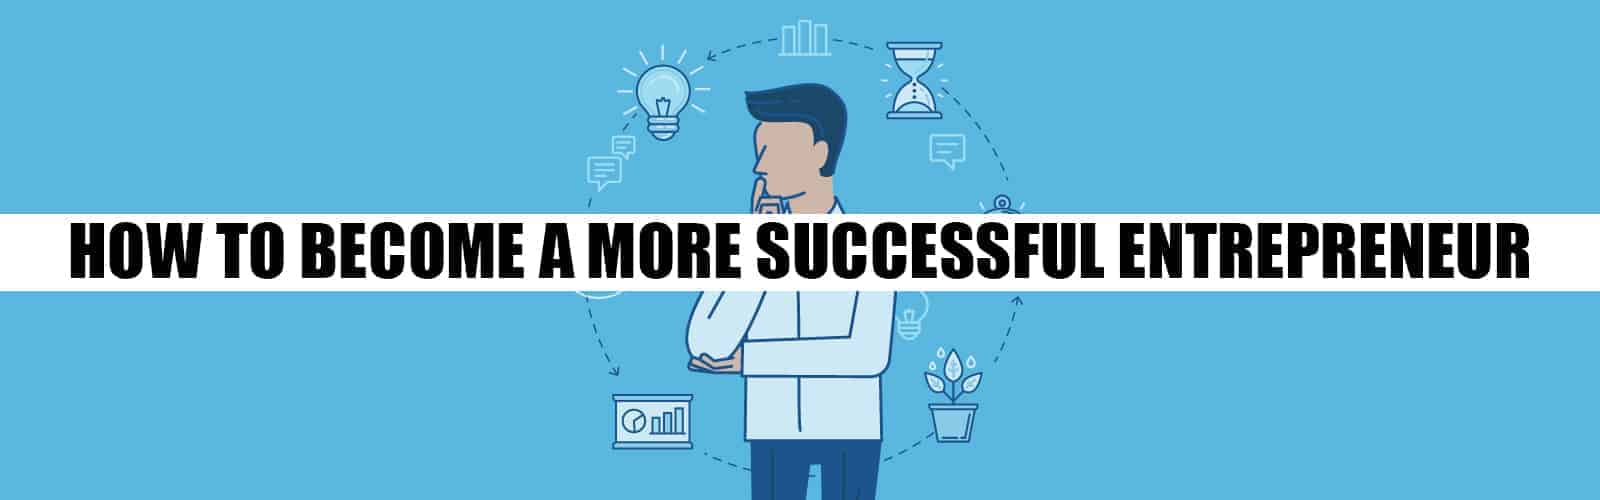 How To Become a More Successful Entrepreneur